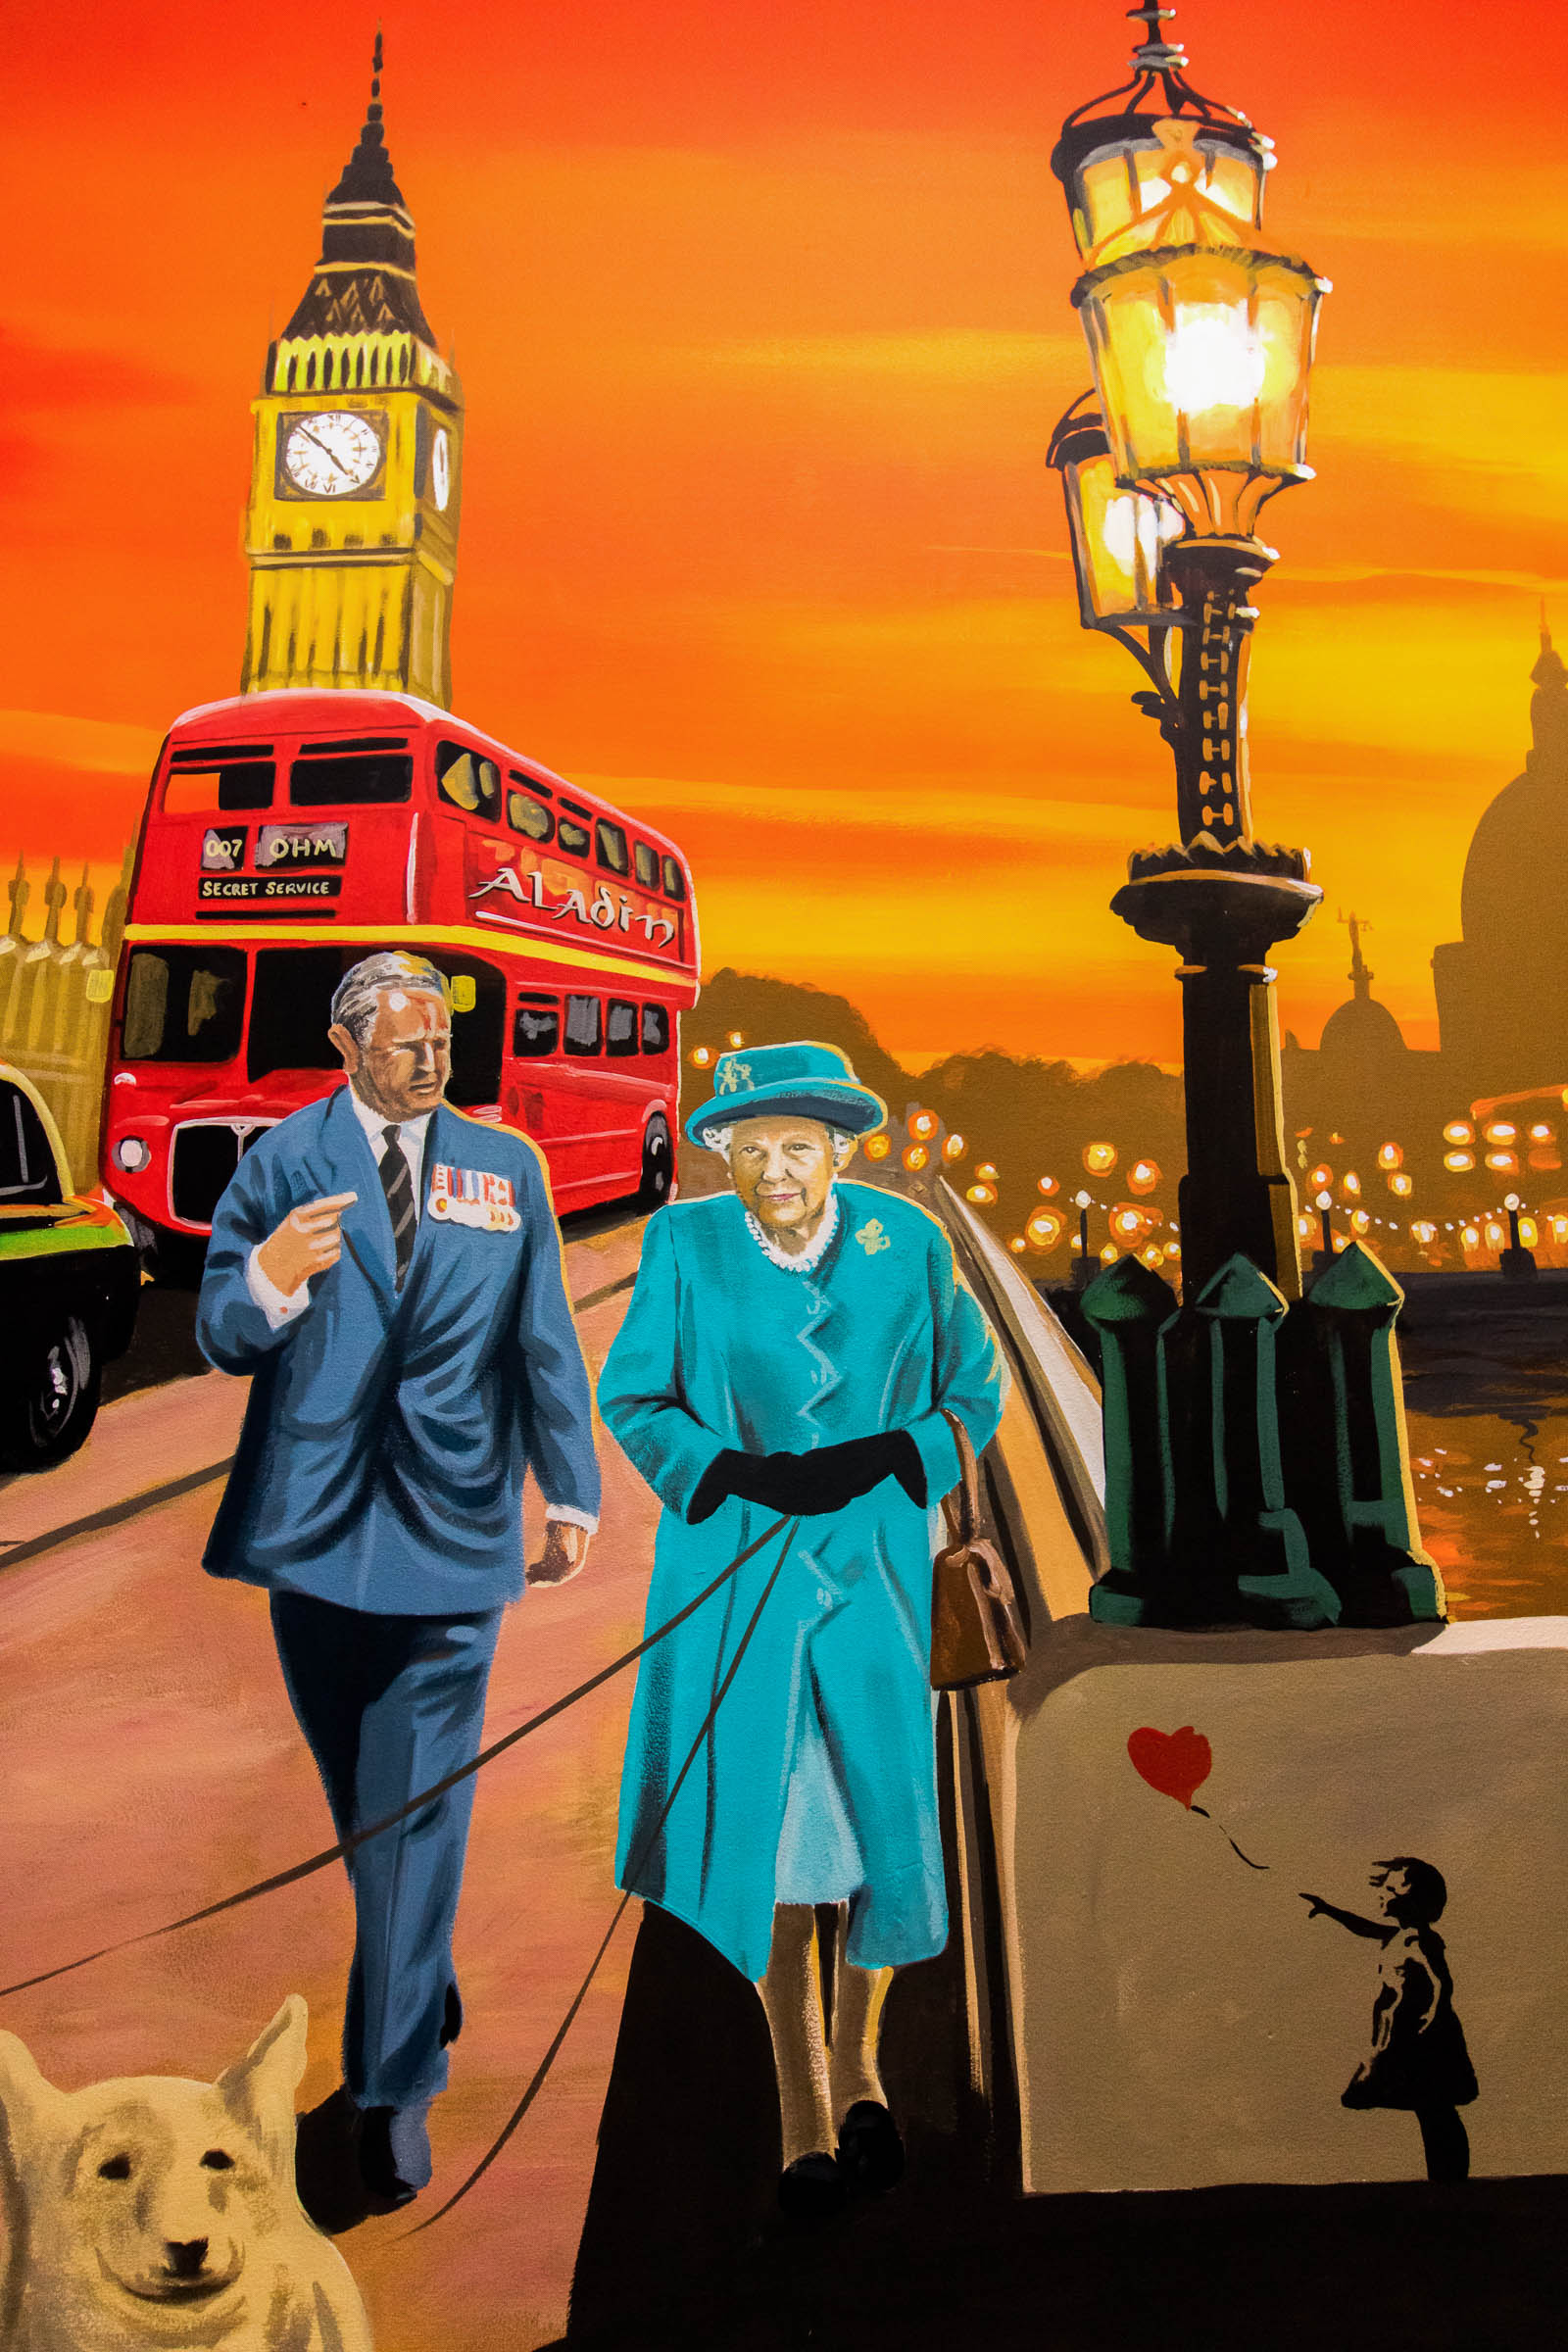 Aladin Mural Restaurant in Brick Lane - The Queen and Prince Charles under a Westminster Bridge streelight in a golden sunset